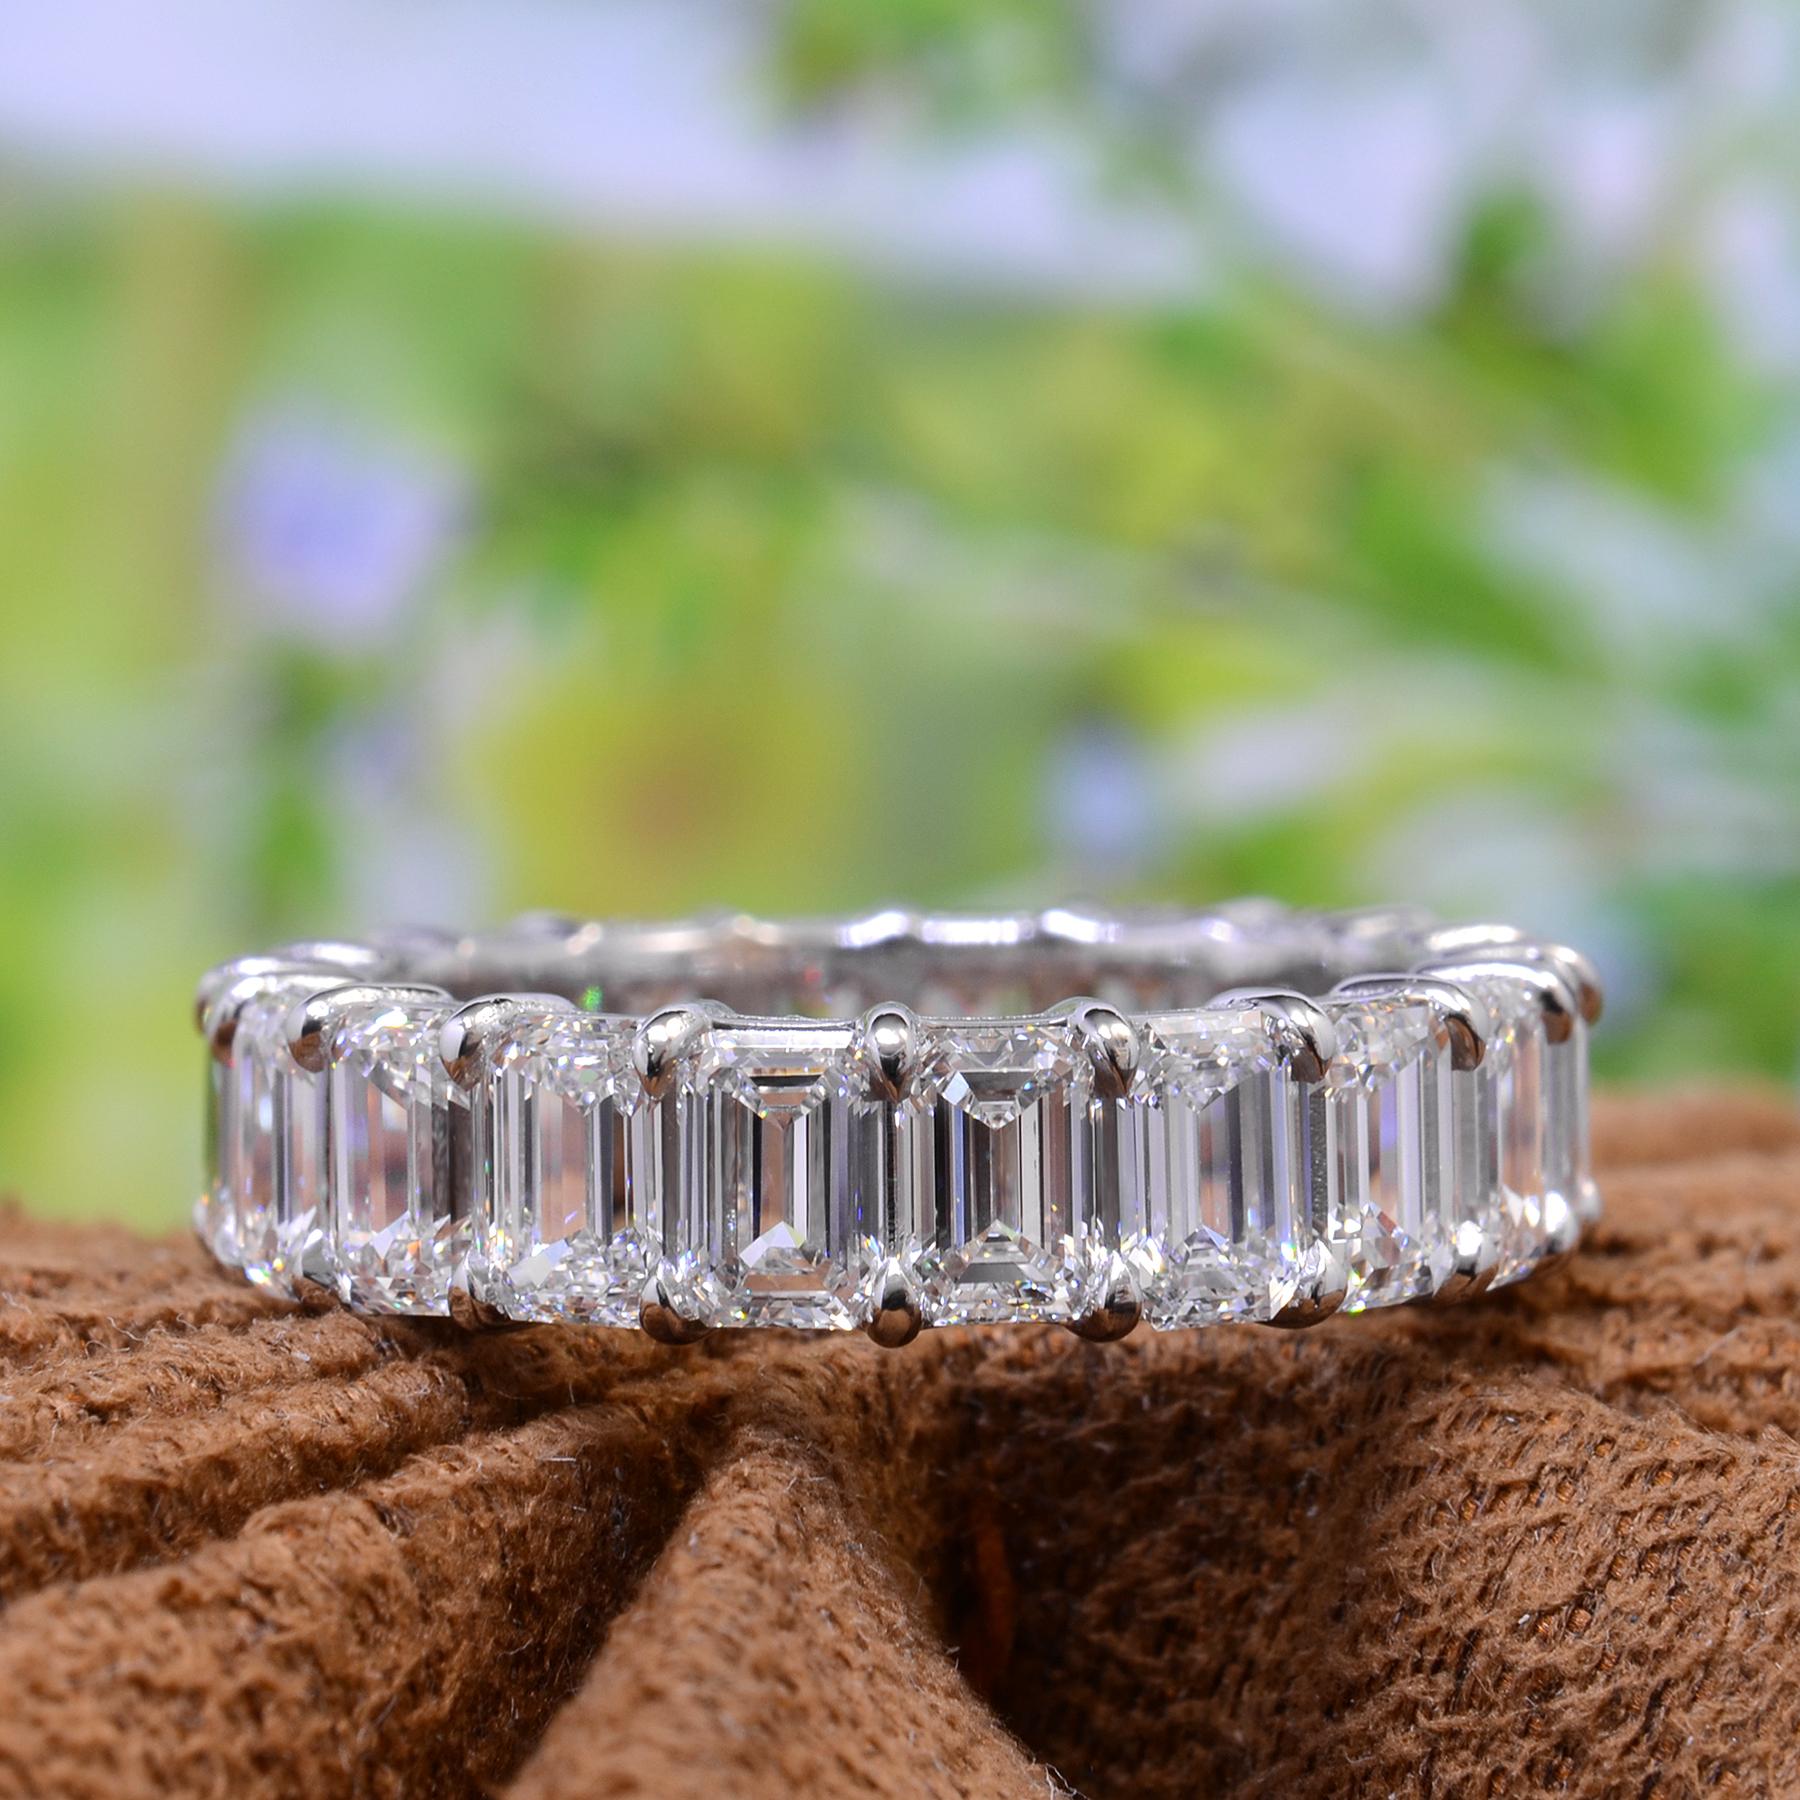 For Sale:  6 Carats Emerald Cut Eternity Band Shared Prongs F-G Color VS1 Clarity Platinum 6